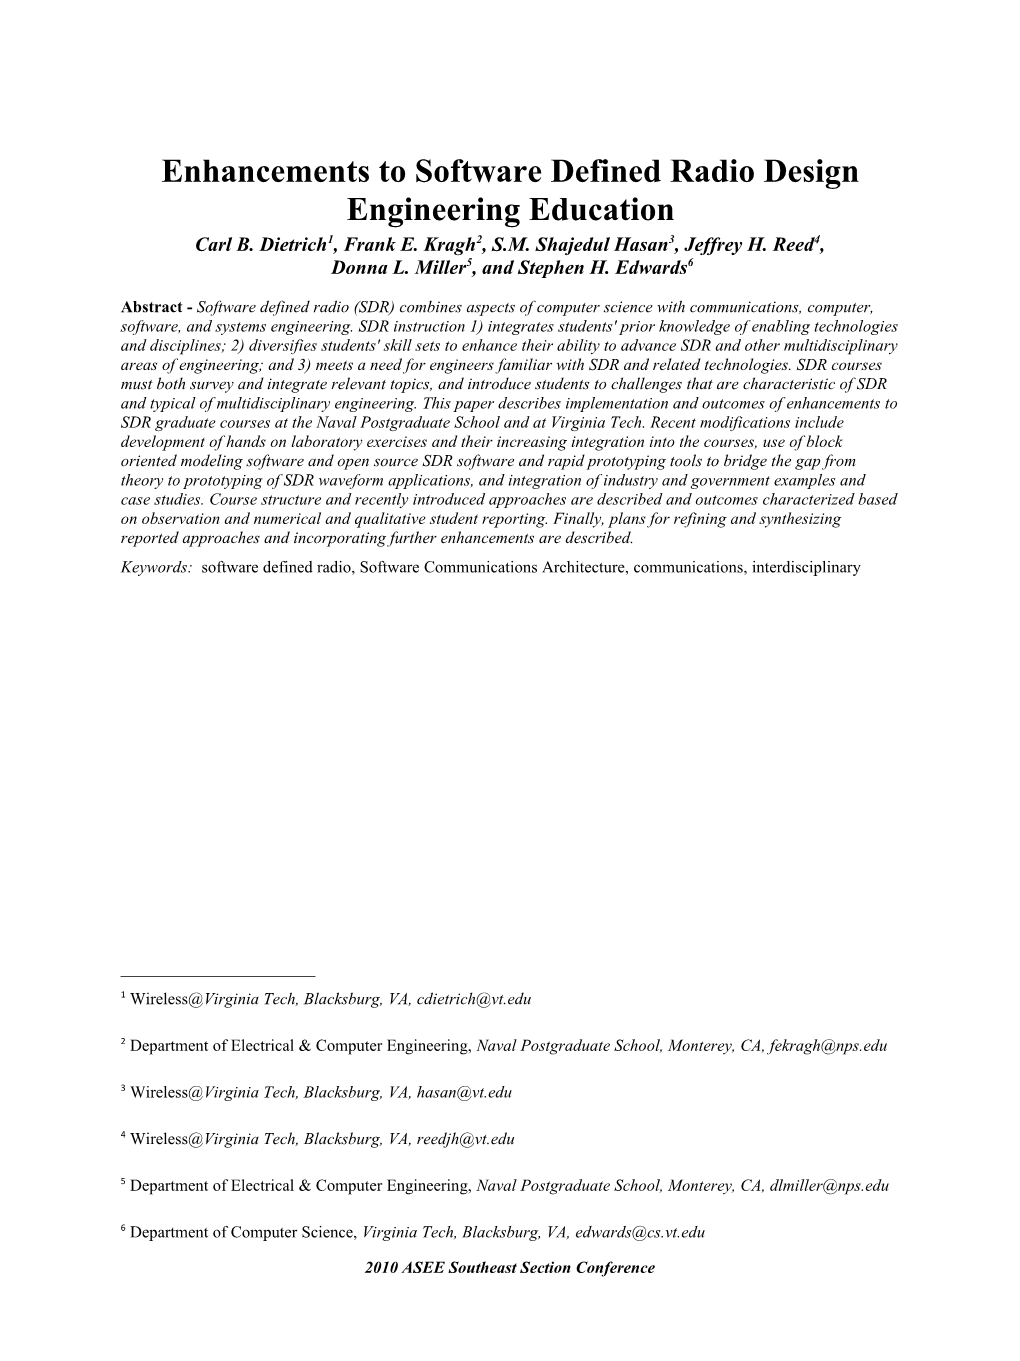 Enhancements to Software Defined Radio Design Engineering Education